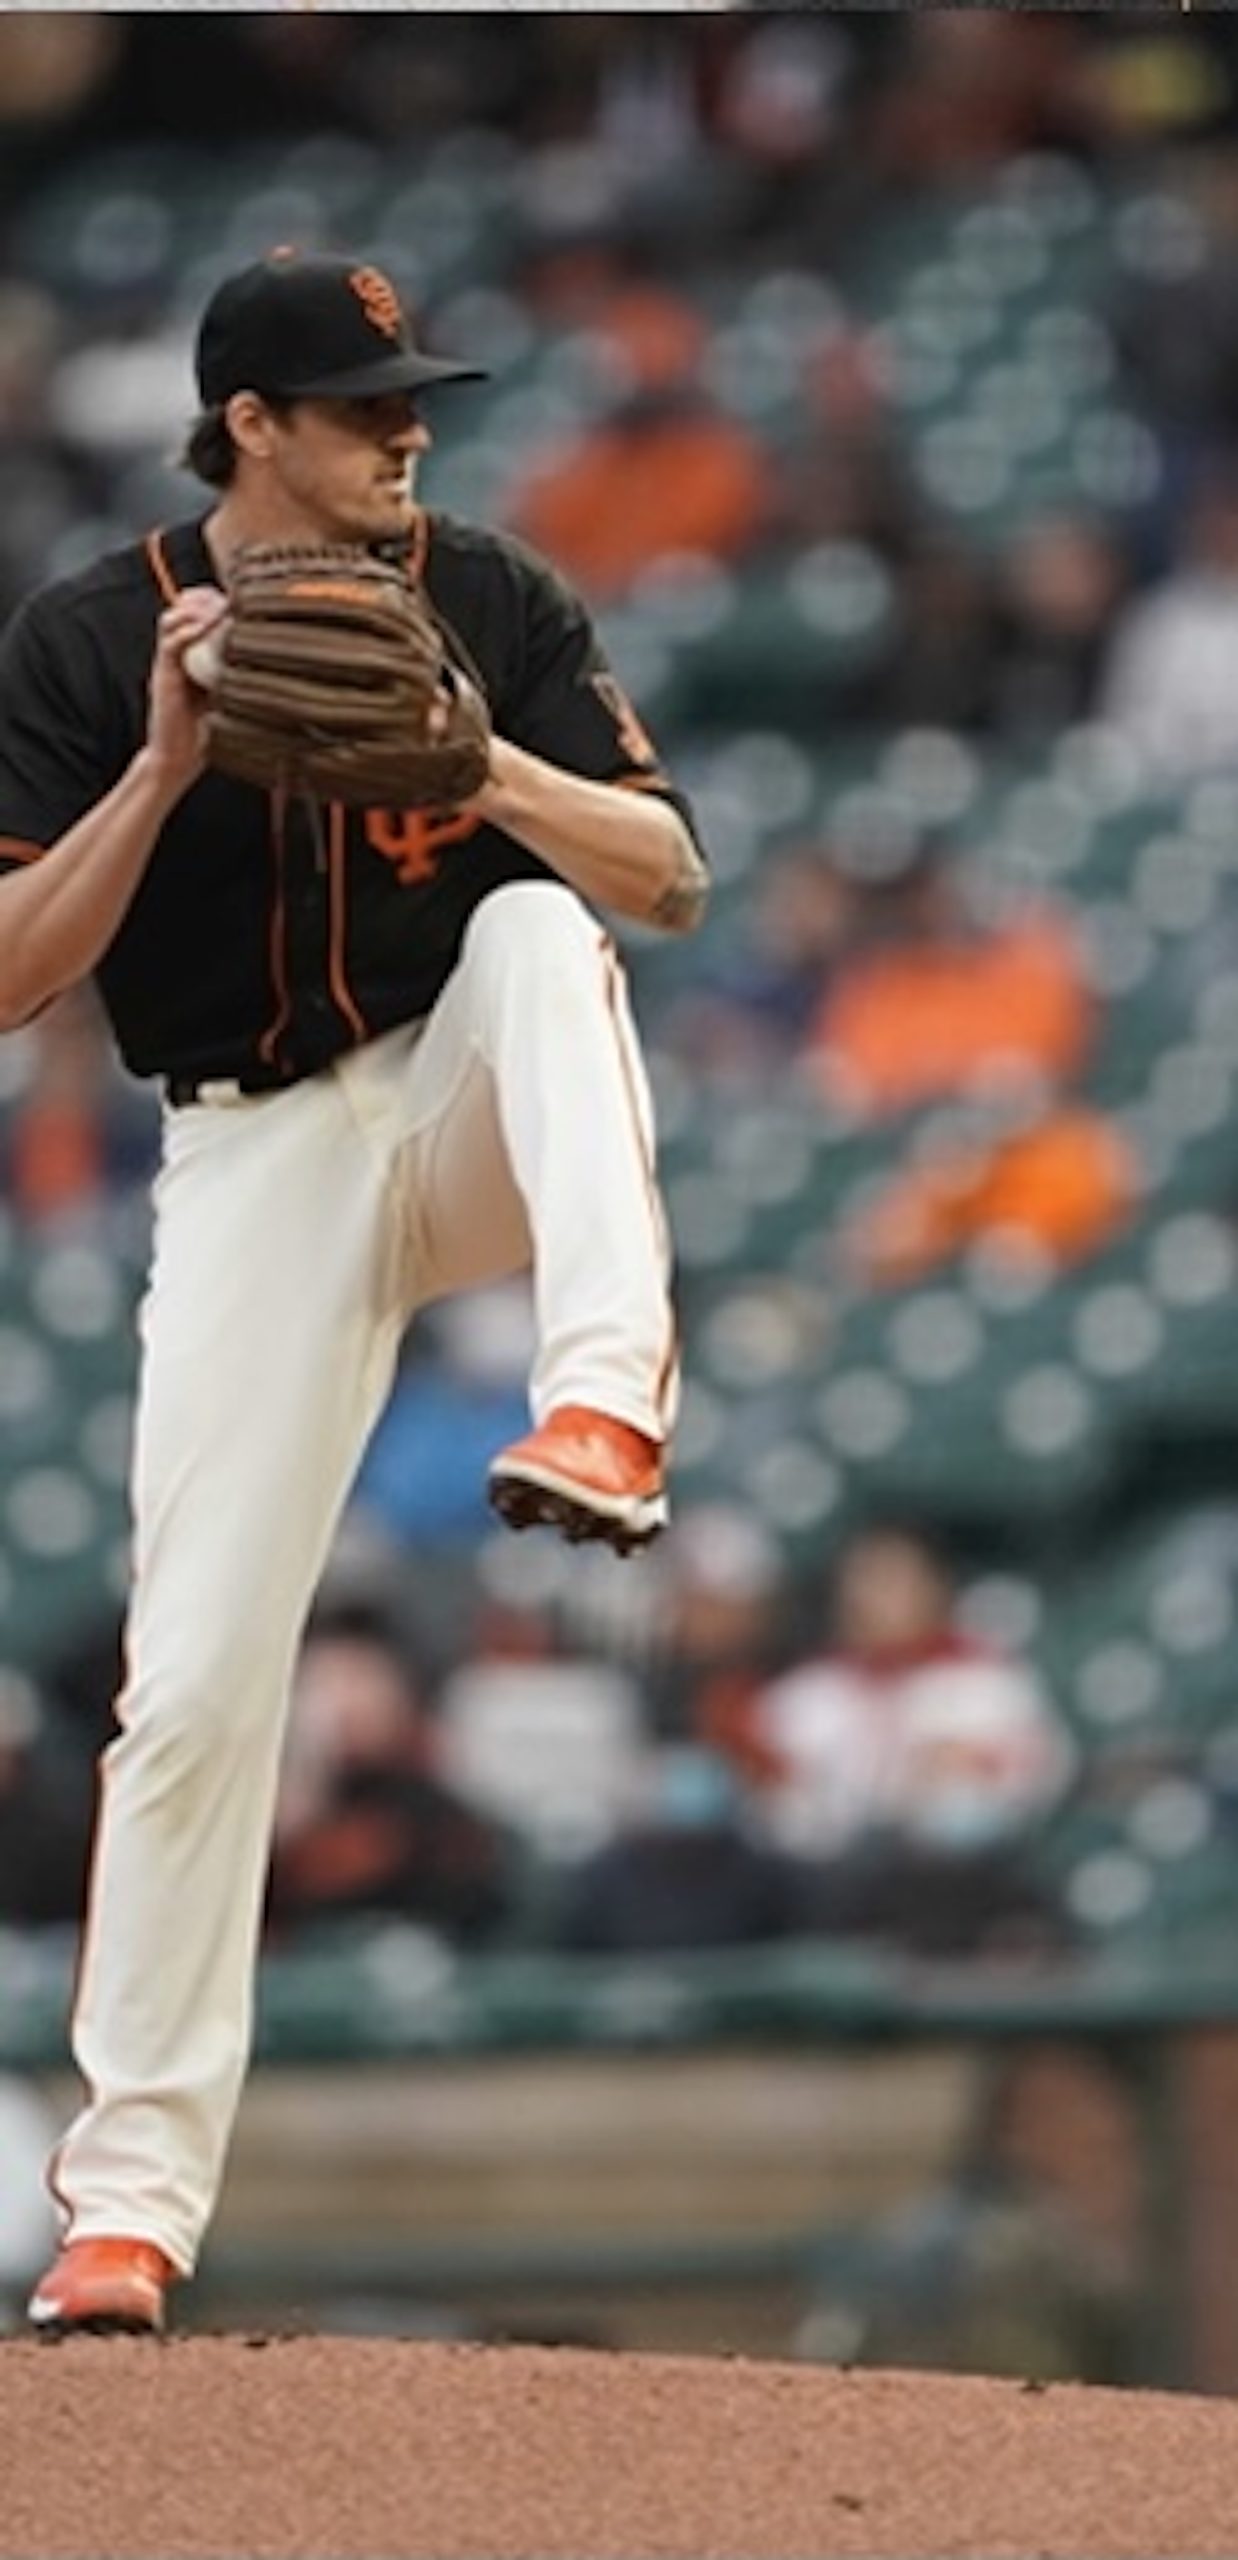 Gausman K’s 11, Giants lose to Marlins in late rally